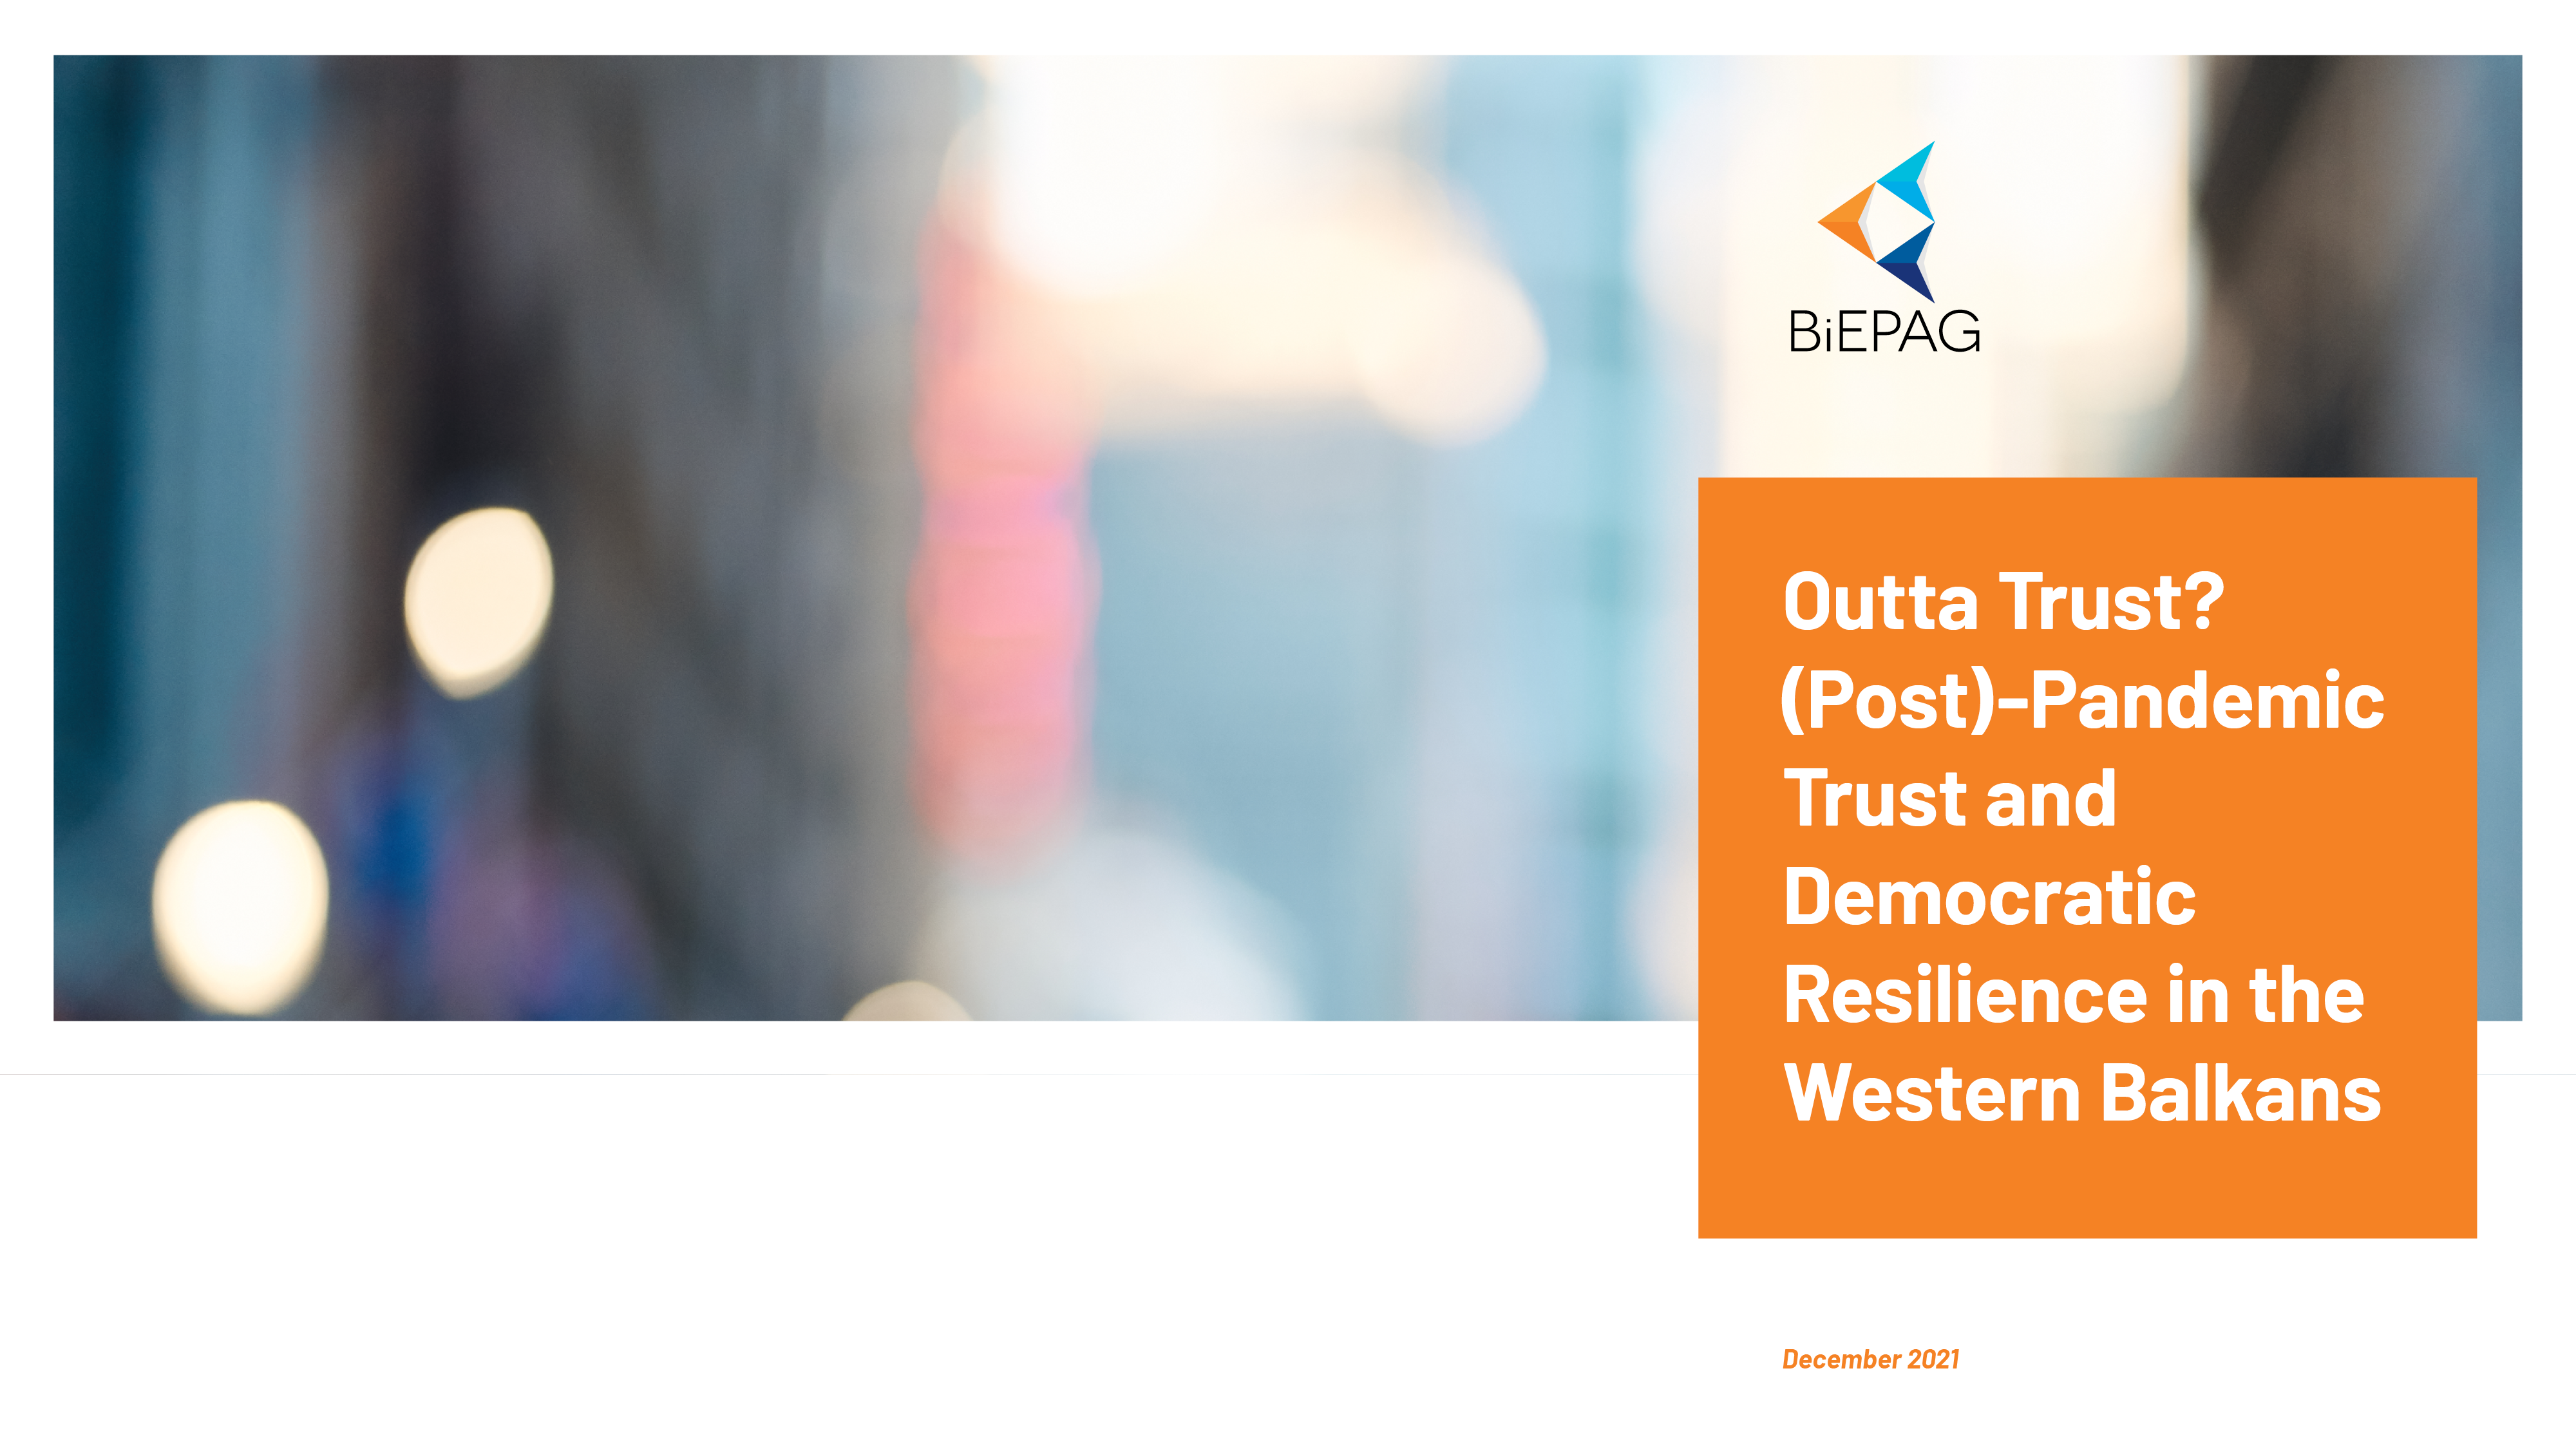 Policy Brief: Outta Trust? (Post)-Pandemic Trust and Democratic Resilience in the Western Balkans